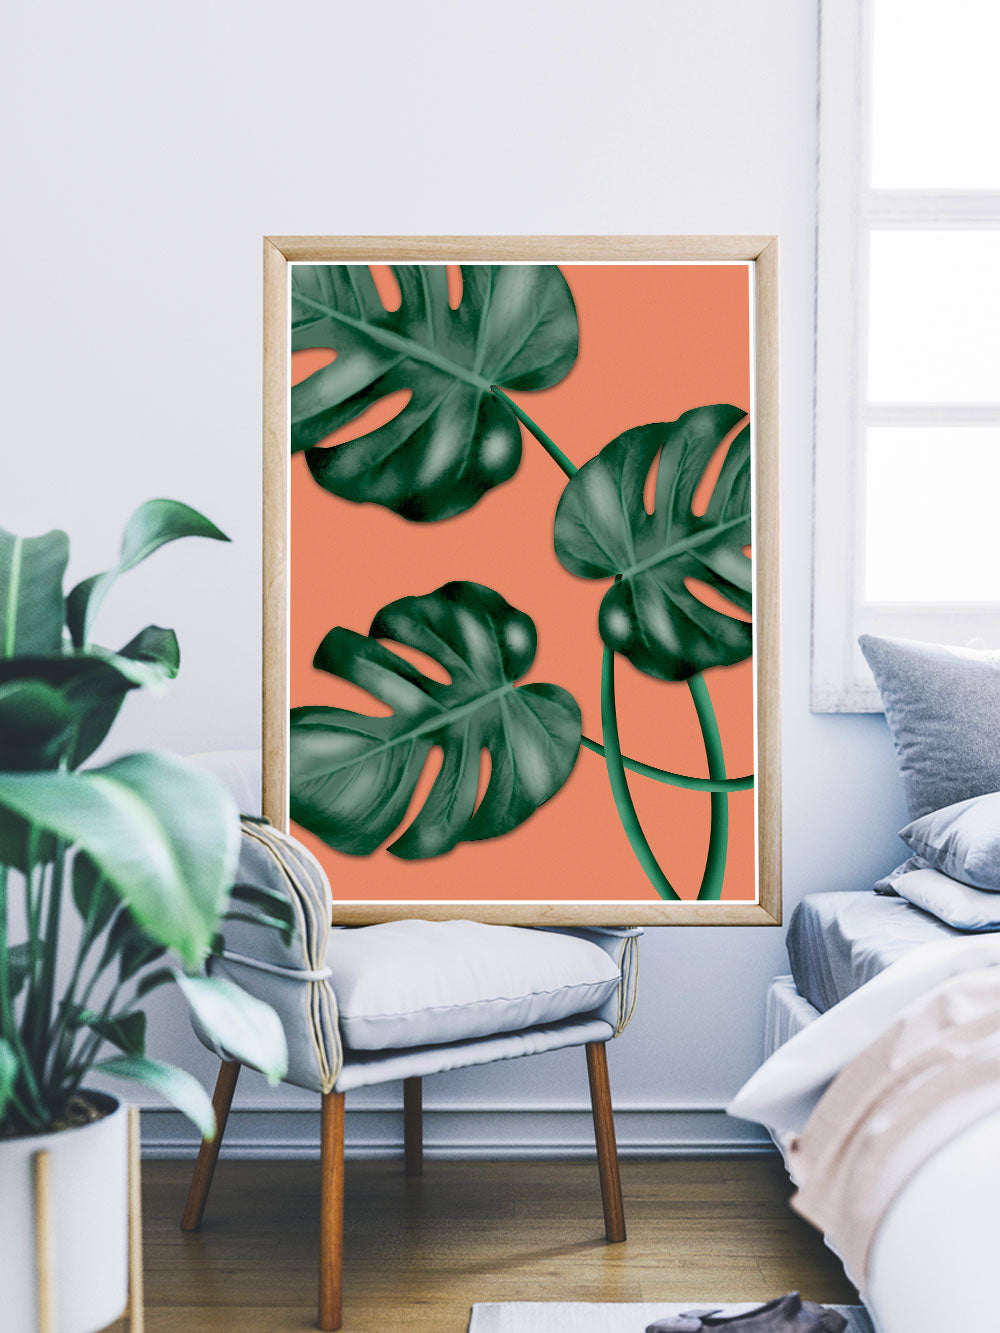 Monstera Orange Botanical Illustration Print sitting on a chair in a bedroom